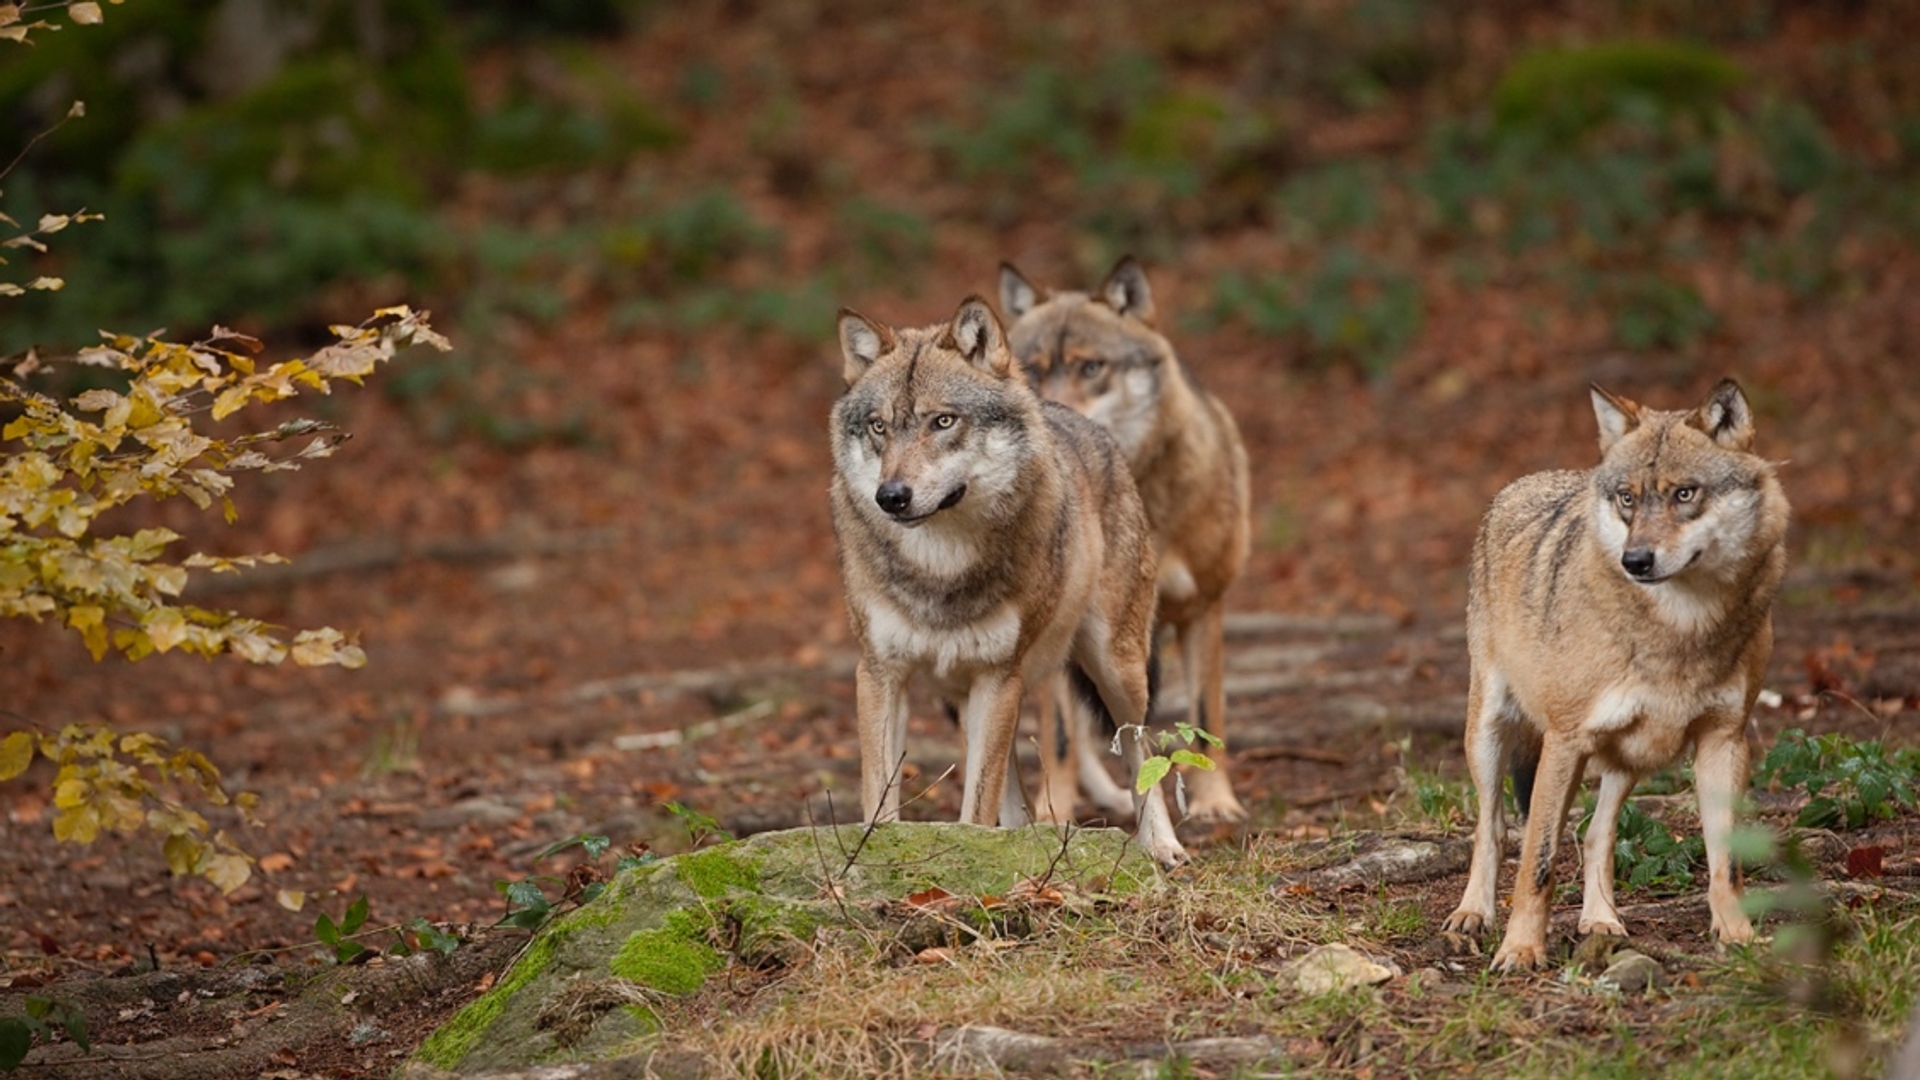 The wolf impacts nature in unexpected ways – early birds